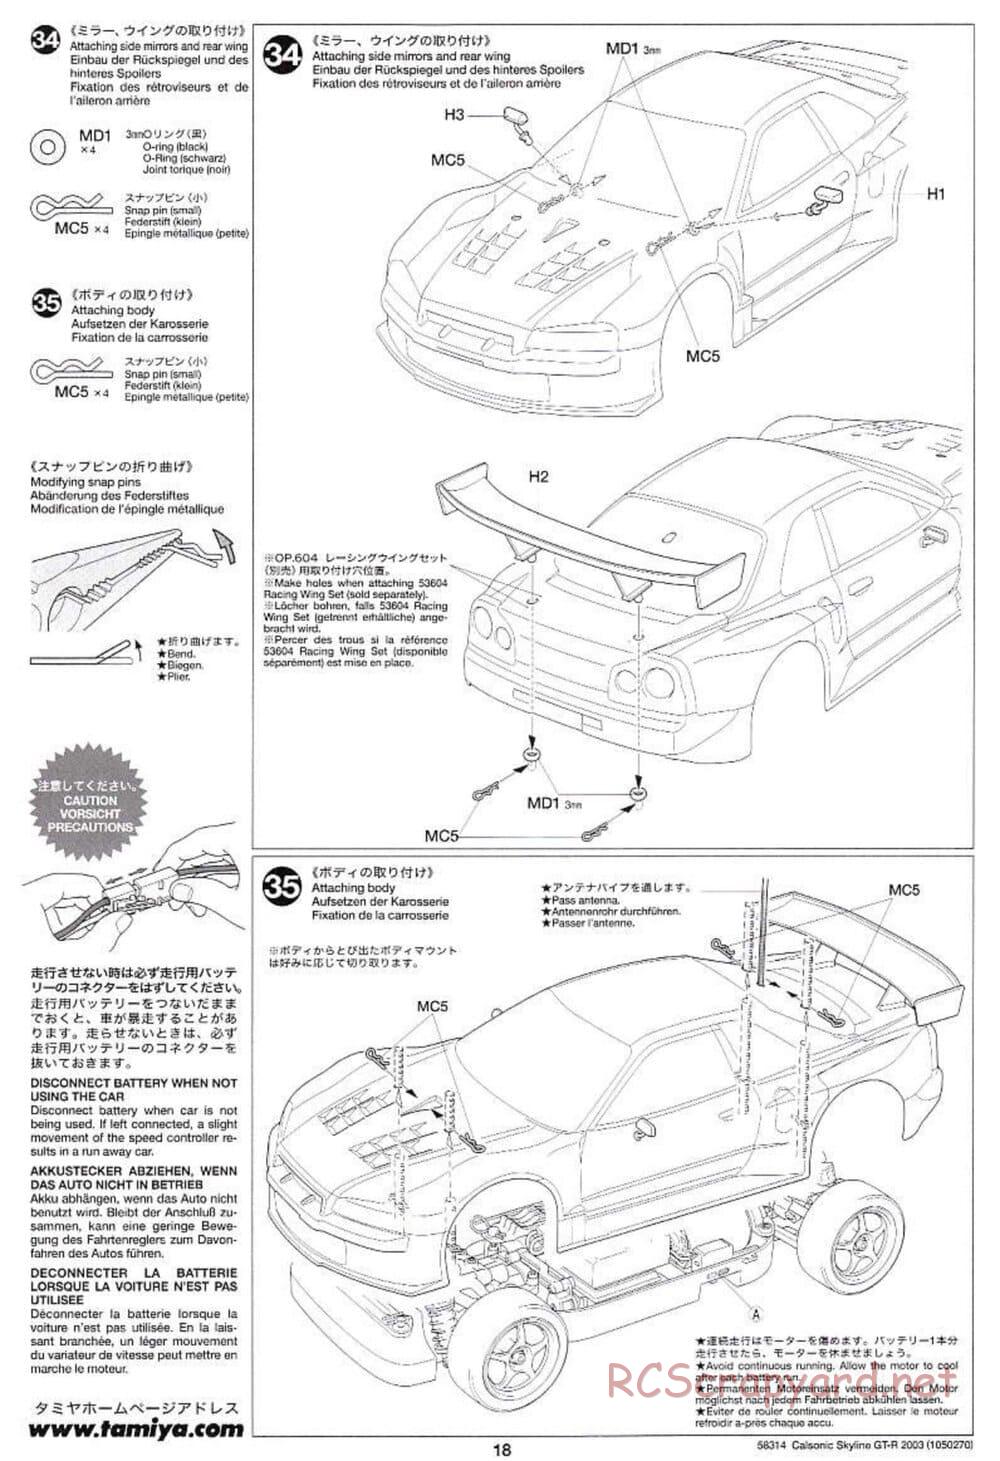 Tamiya - Calsonic Skyline GT-R 2003 - TT-01 Chassis - Manual - Page 18